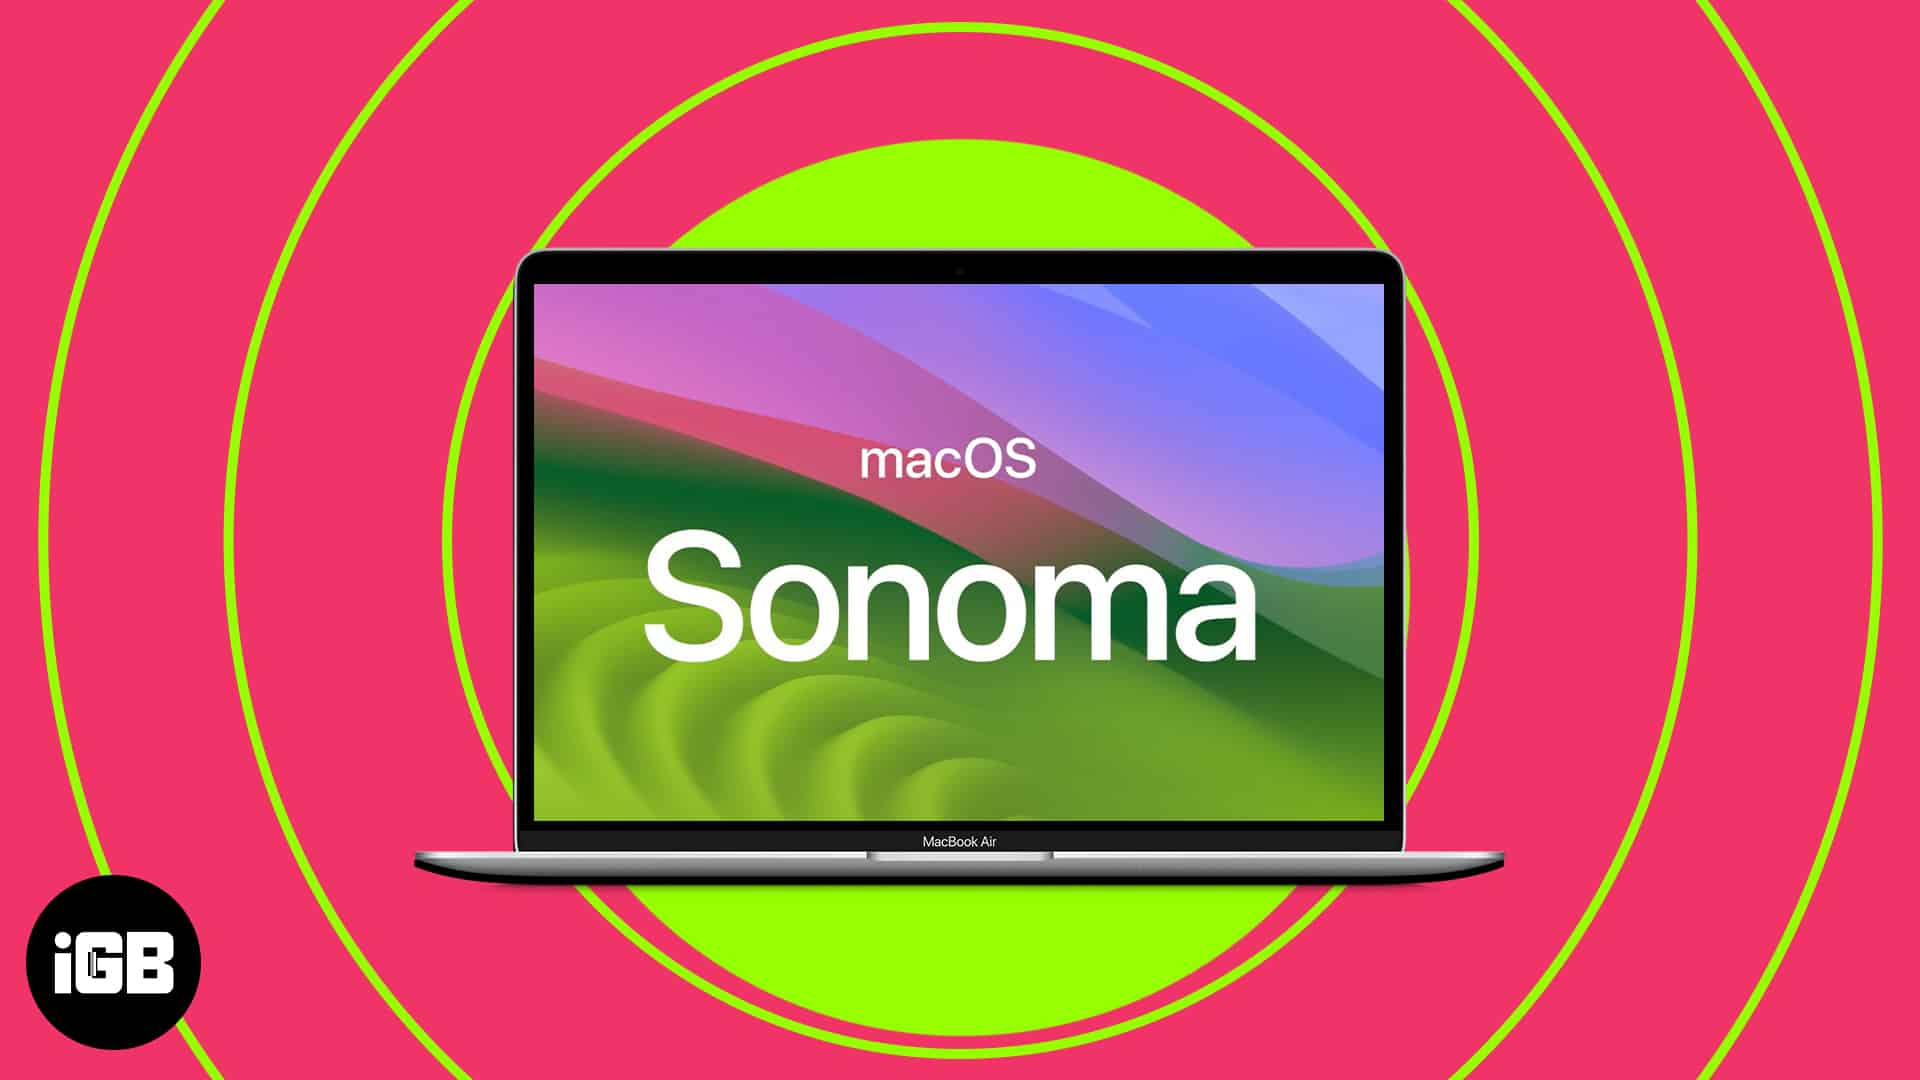 Download macos sonoma wallpapers